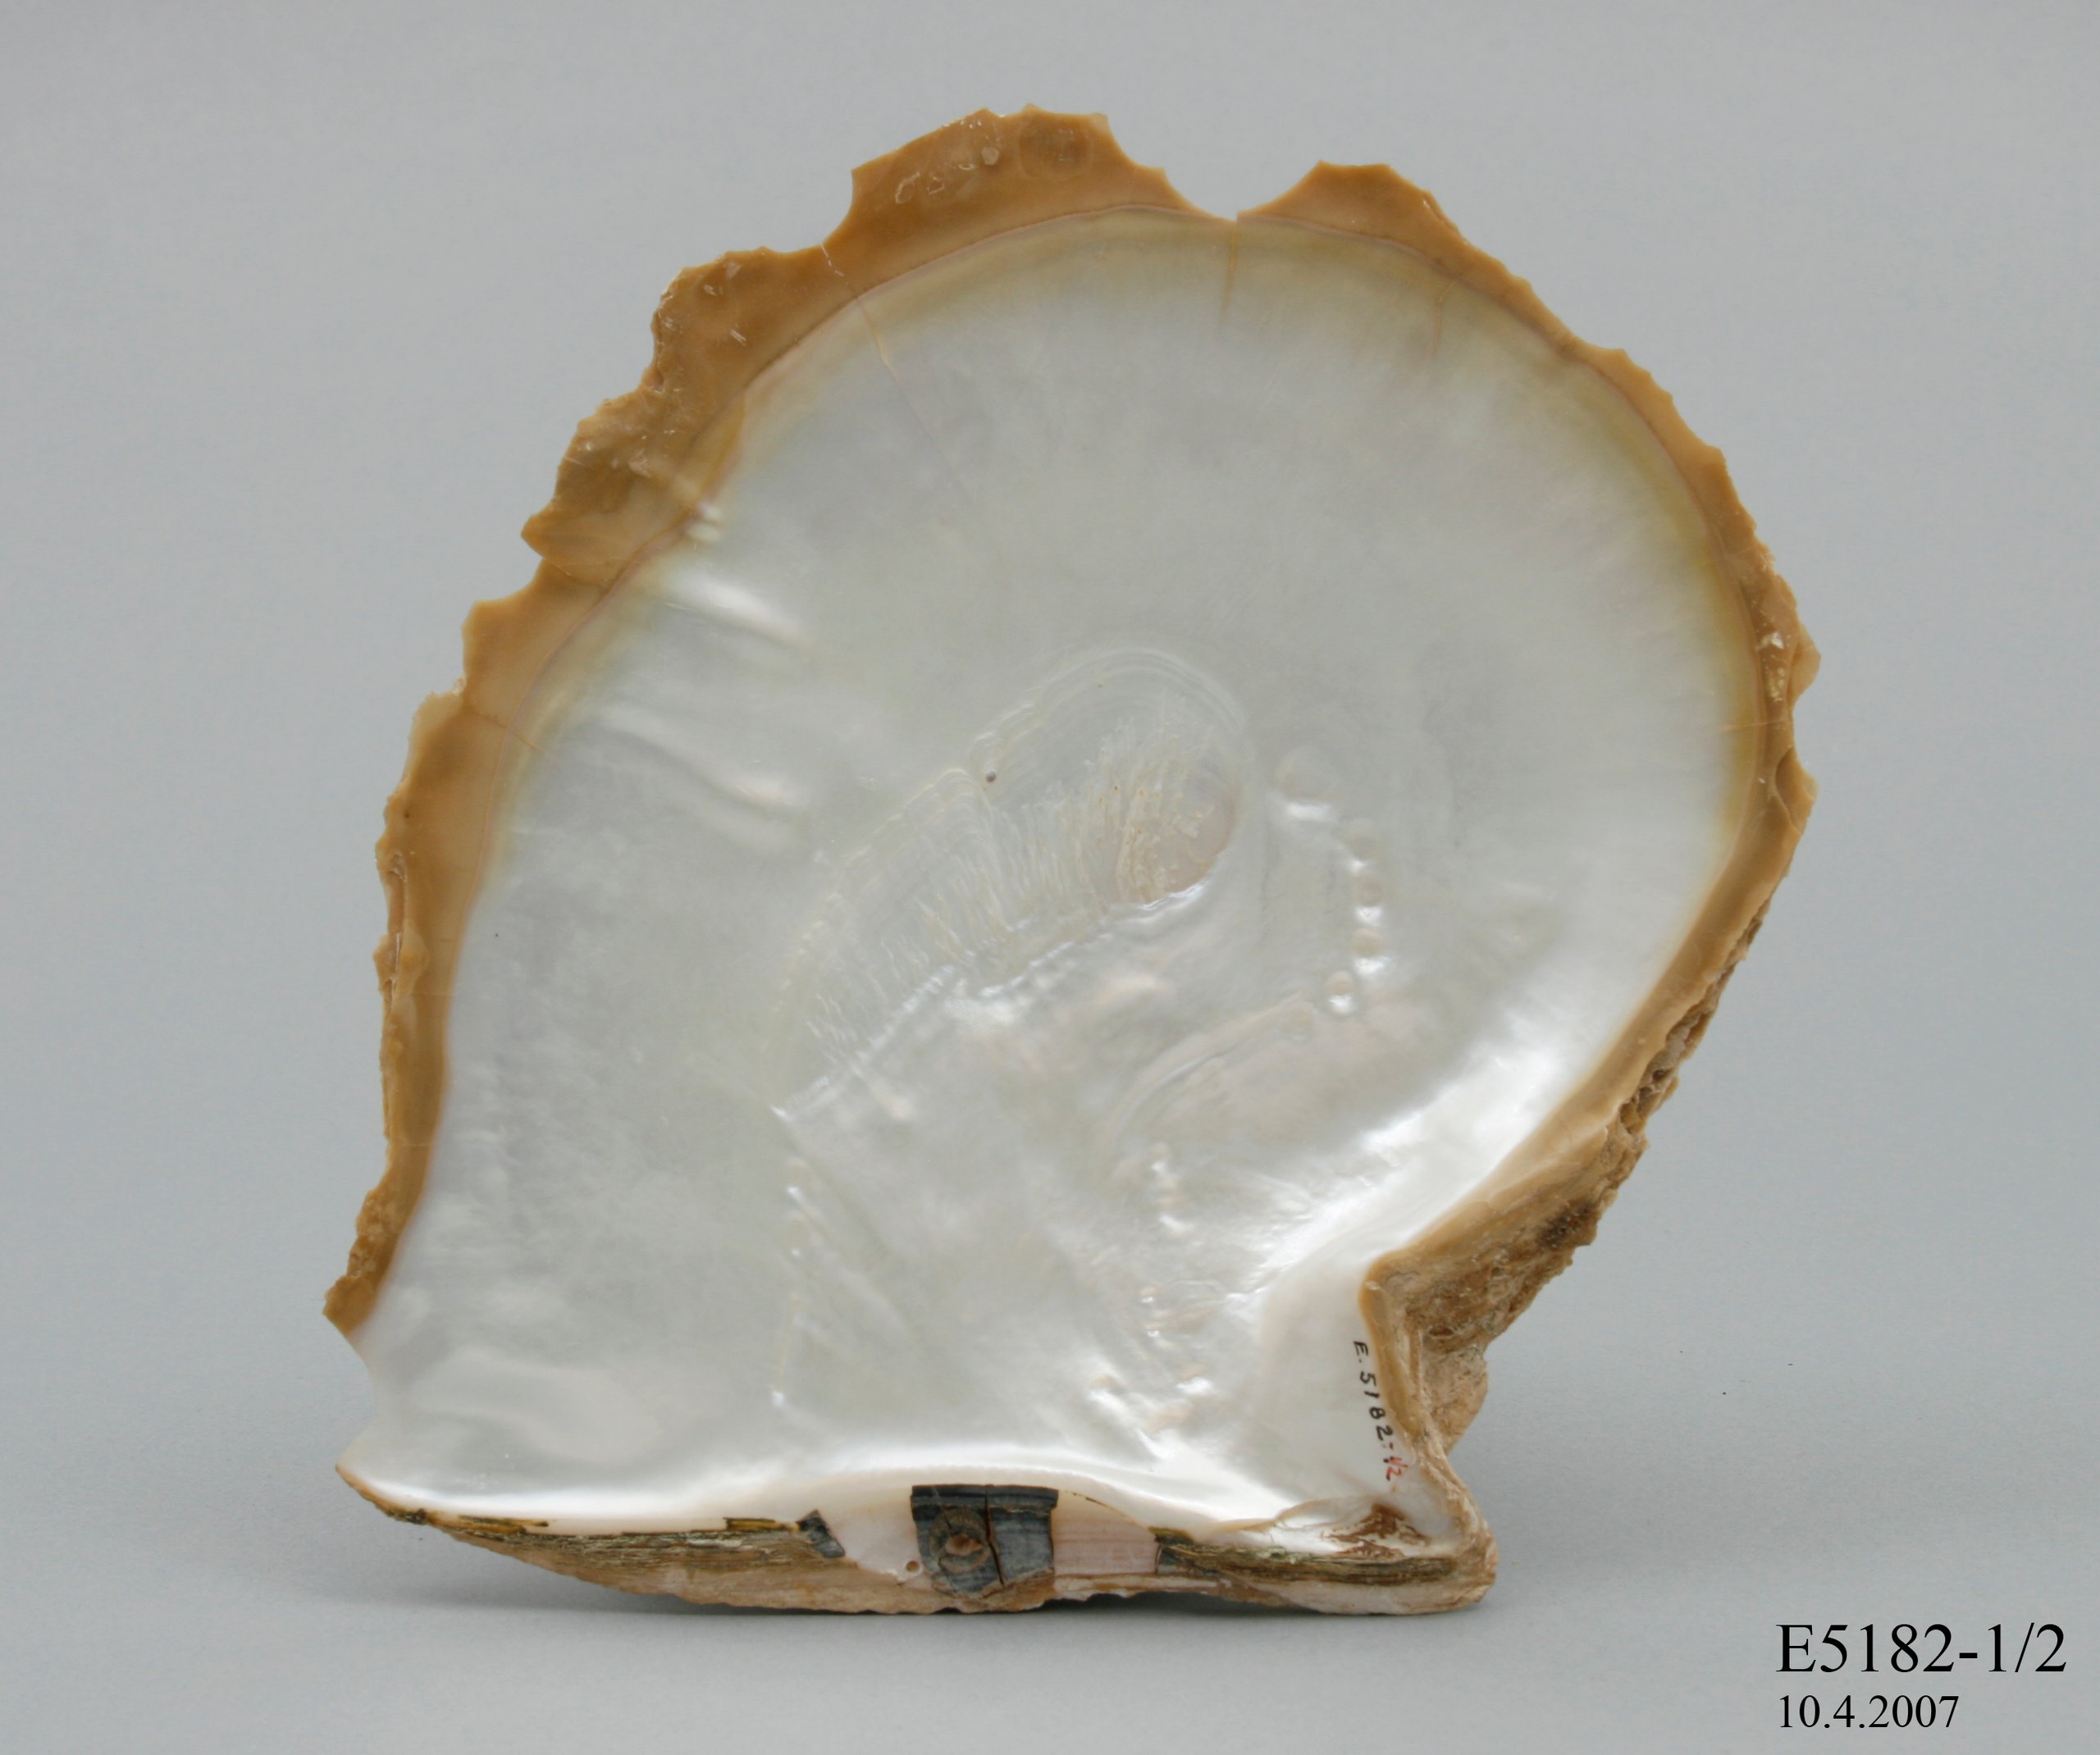 Pearl shell from didactic display